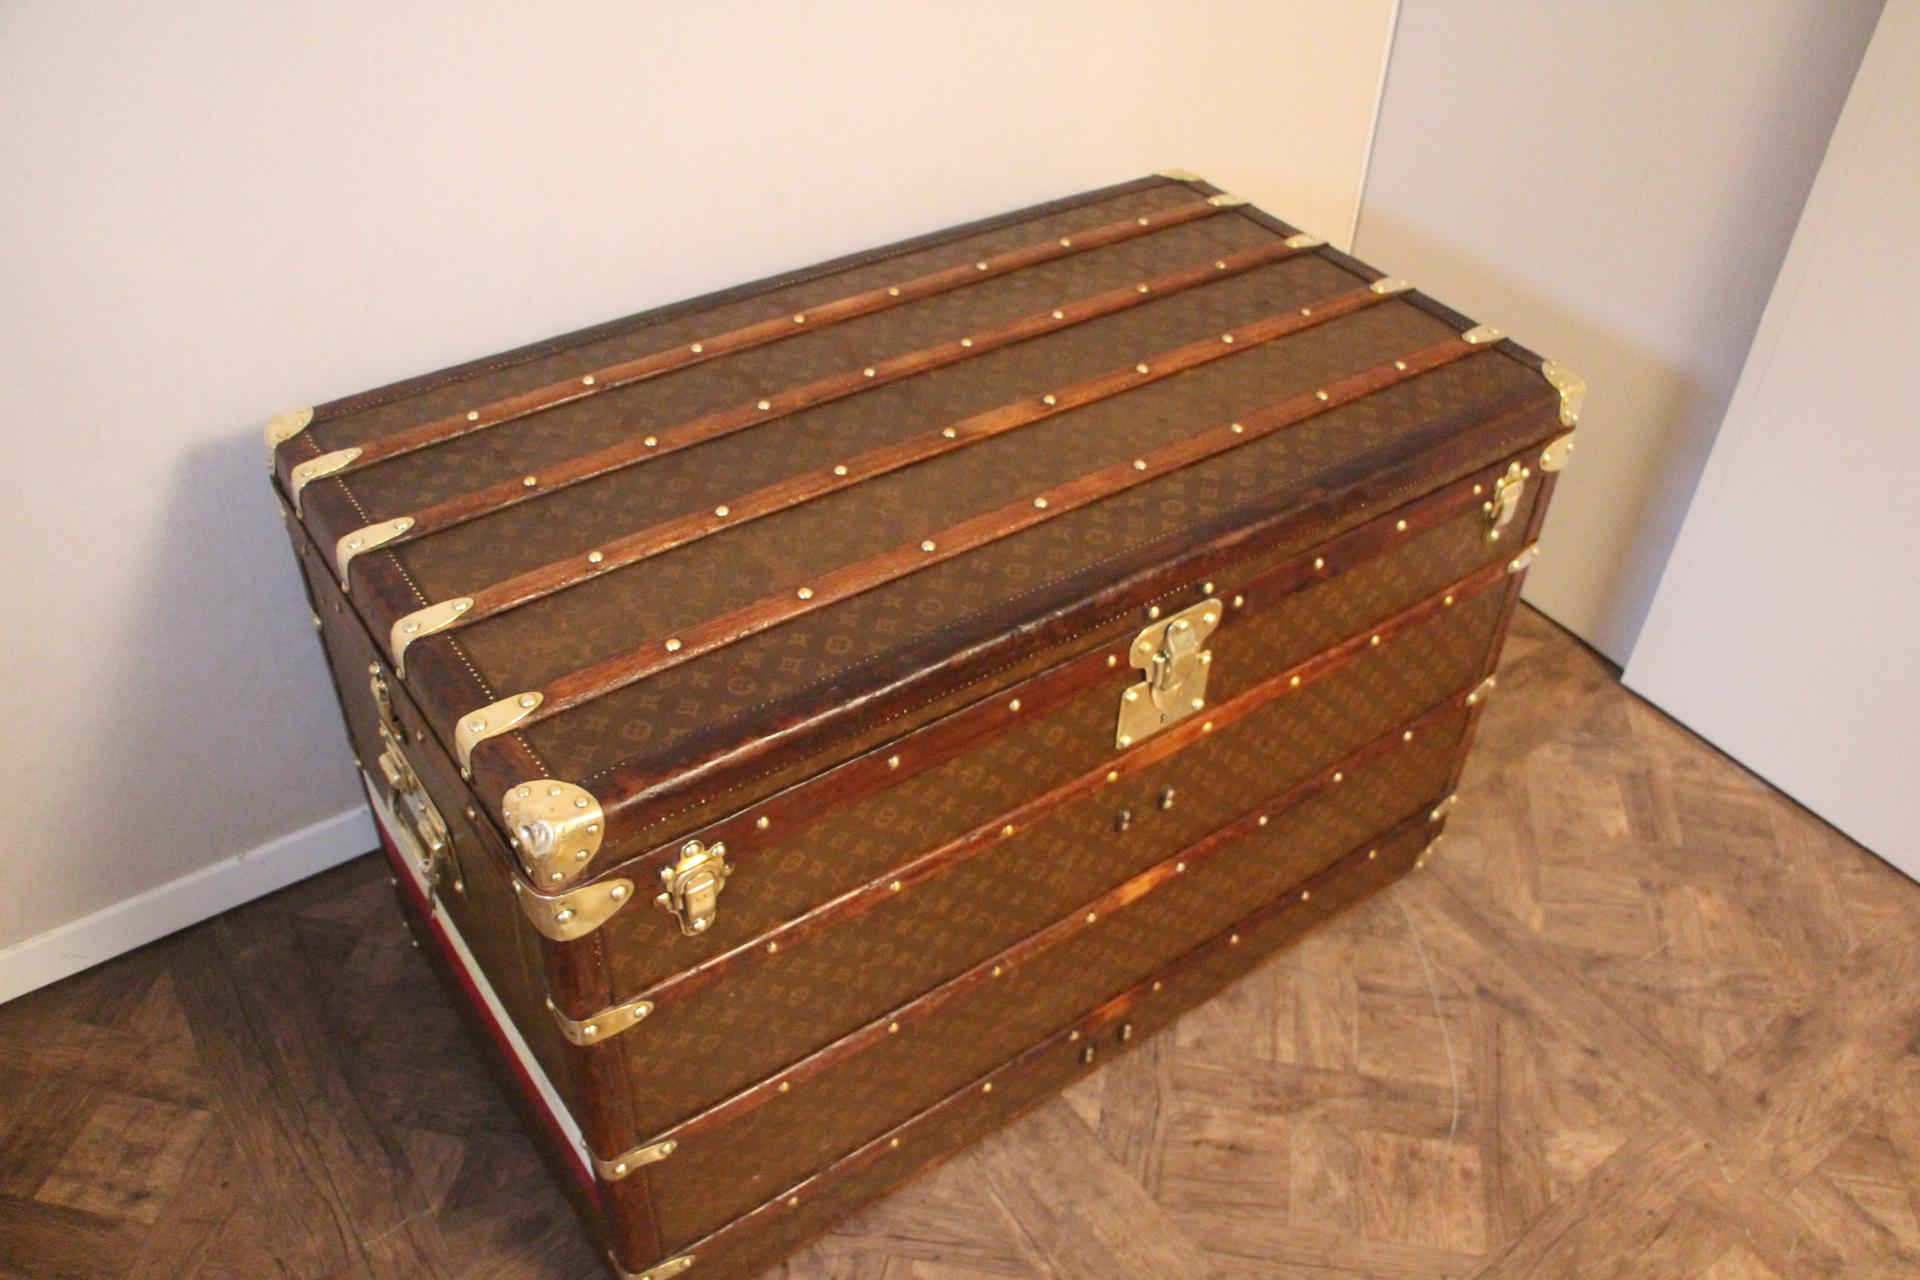 Exceptional and rare Louis Vuitton high steamer trunk featuring stencilled canvas, all leather trim, solid brass Louis Vuitton stamped clasps and lock, solid brass corners and solid brass LV stamped side handles.
Painted stripes on the sides. Very